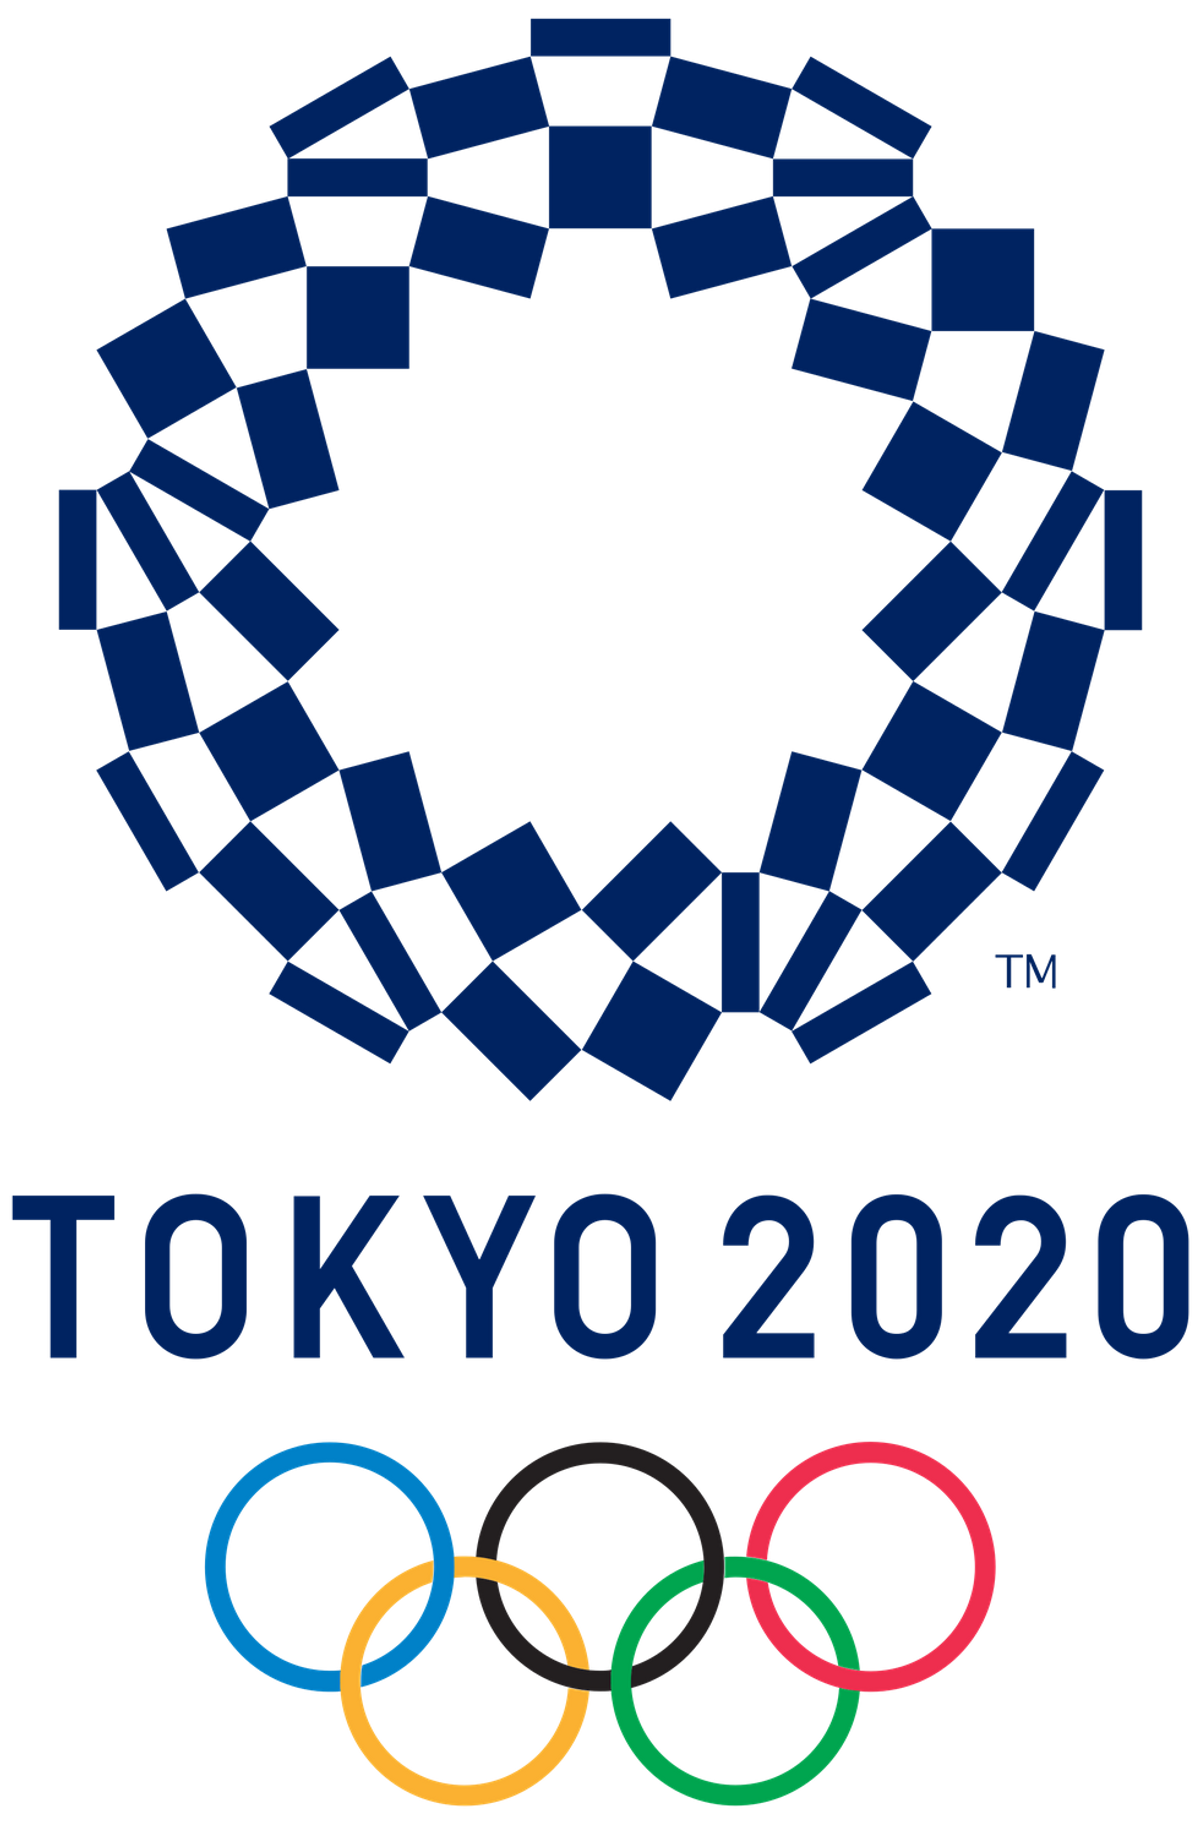 What Should We Question Heading Towards Tokyo 2020?